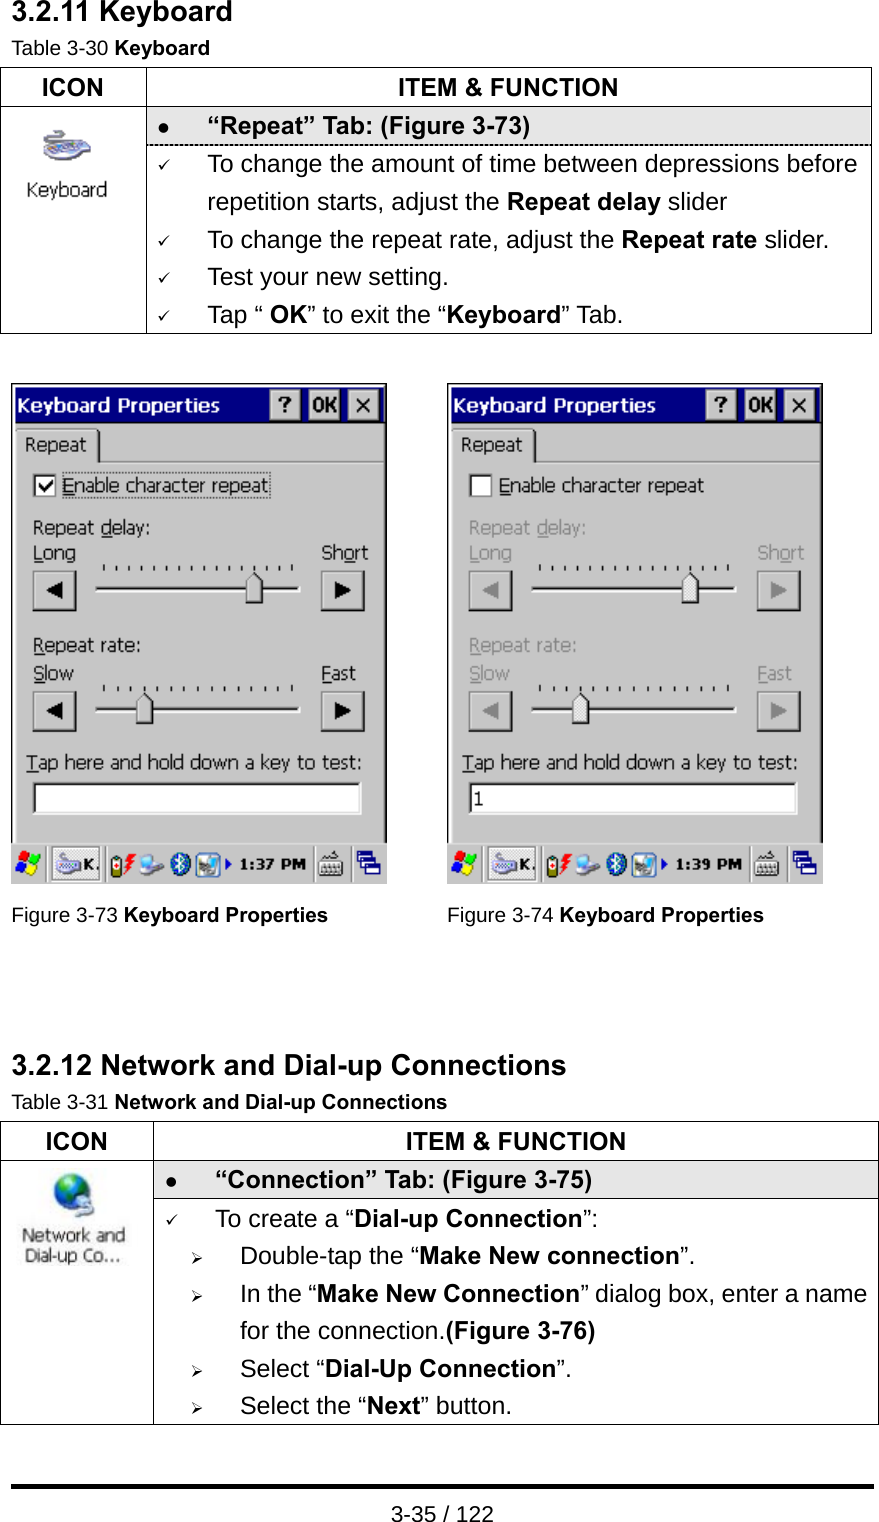  3-35 / 122 3.2.11 Keyboard Table 3-30 Keyboard ICON  ITEM &amp; FUNCTION z “Repeat” Tab: (Figure 3-73)    9 To change the amount of time between depressions before repetition starts, adjust the Repeat delay slider 9 To change the repeat rate, adjust the Repeat rate slider. 9 Test your new setting. 9 Tap “ OK” to exit the “Keyboard” Tab.     Figure 3-73 Keyboard Properties  Figure 3-74 Keyboard Properties   3.2.12 Network and Dial-up Connections Table 3-31 Network and Dial-up Connections ICON  ITEM &amp; FUNCTION z “Connection” Tab: (Figure 3-75)      9 To create a “Dial-up Connection”: ¾ Double-tap the “Make New connection”. ¾ In the “Make New Connection” dialog box, enter a name for the connection.(Figure 3-76) ¾ Select “Dial-Up Connection”. ¾ Select the “Next” button. 